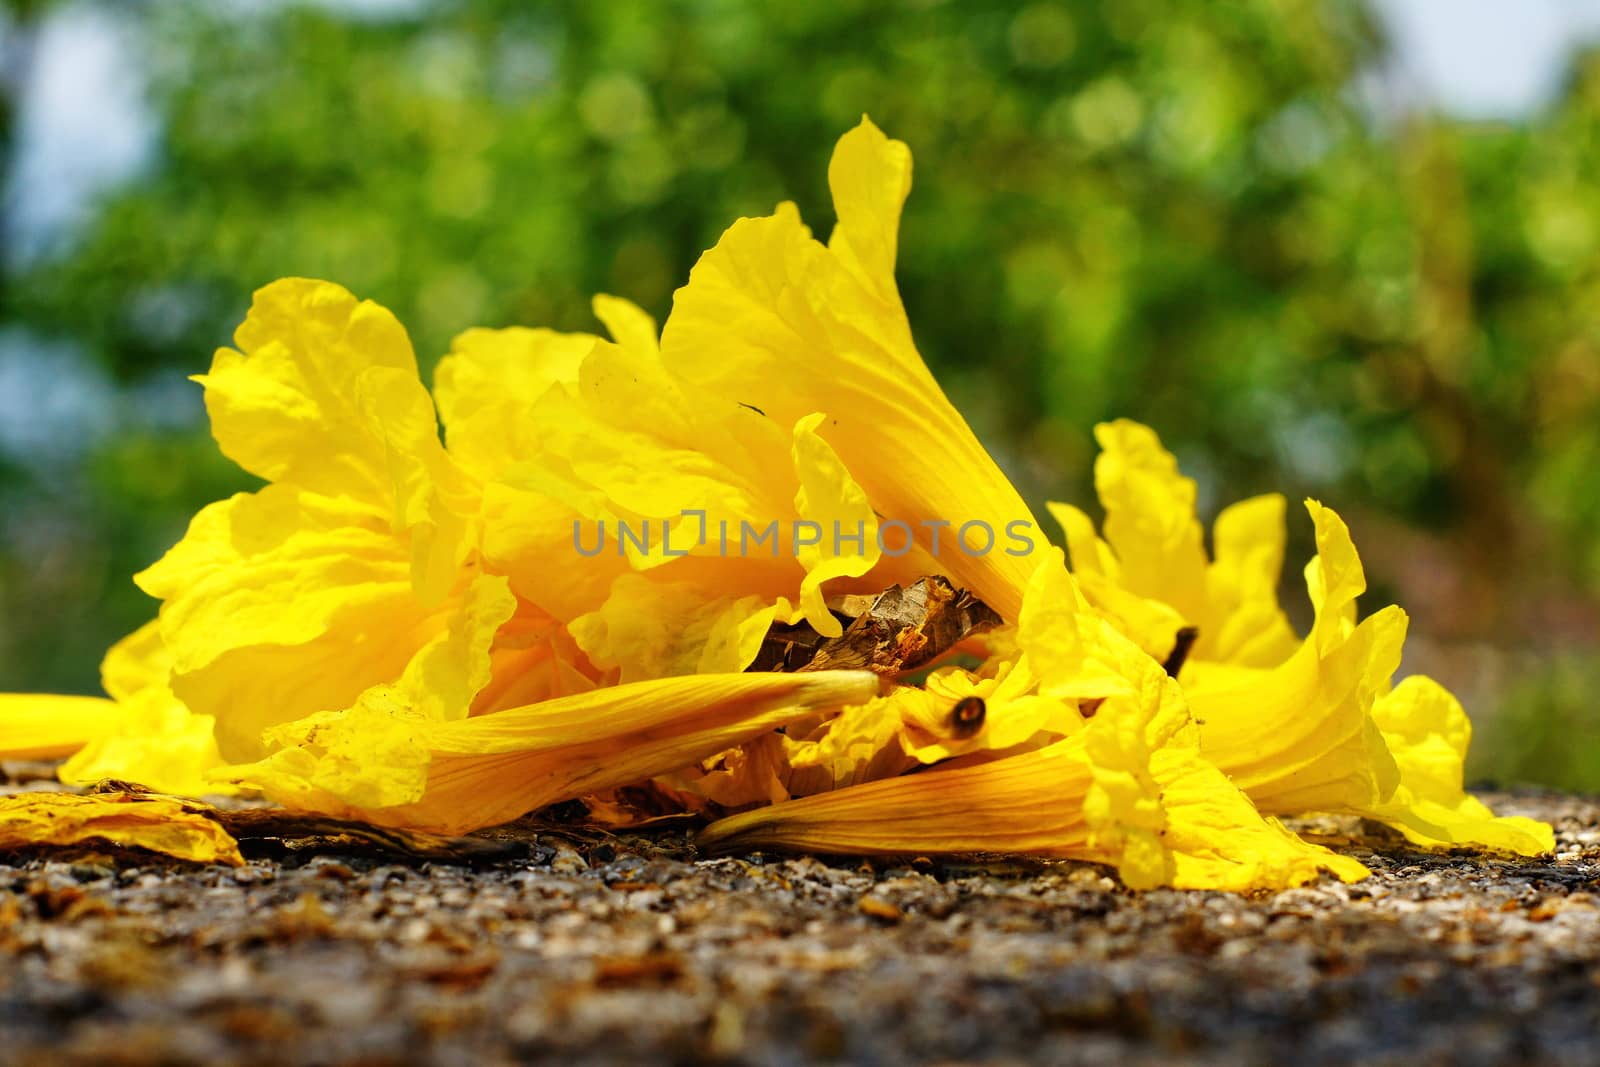 Yellow tabebuia, Trumpet flower on the ground